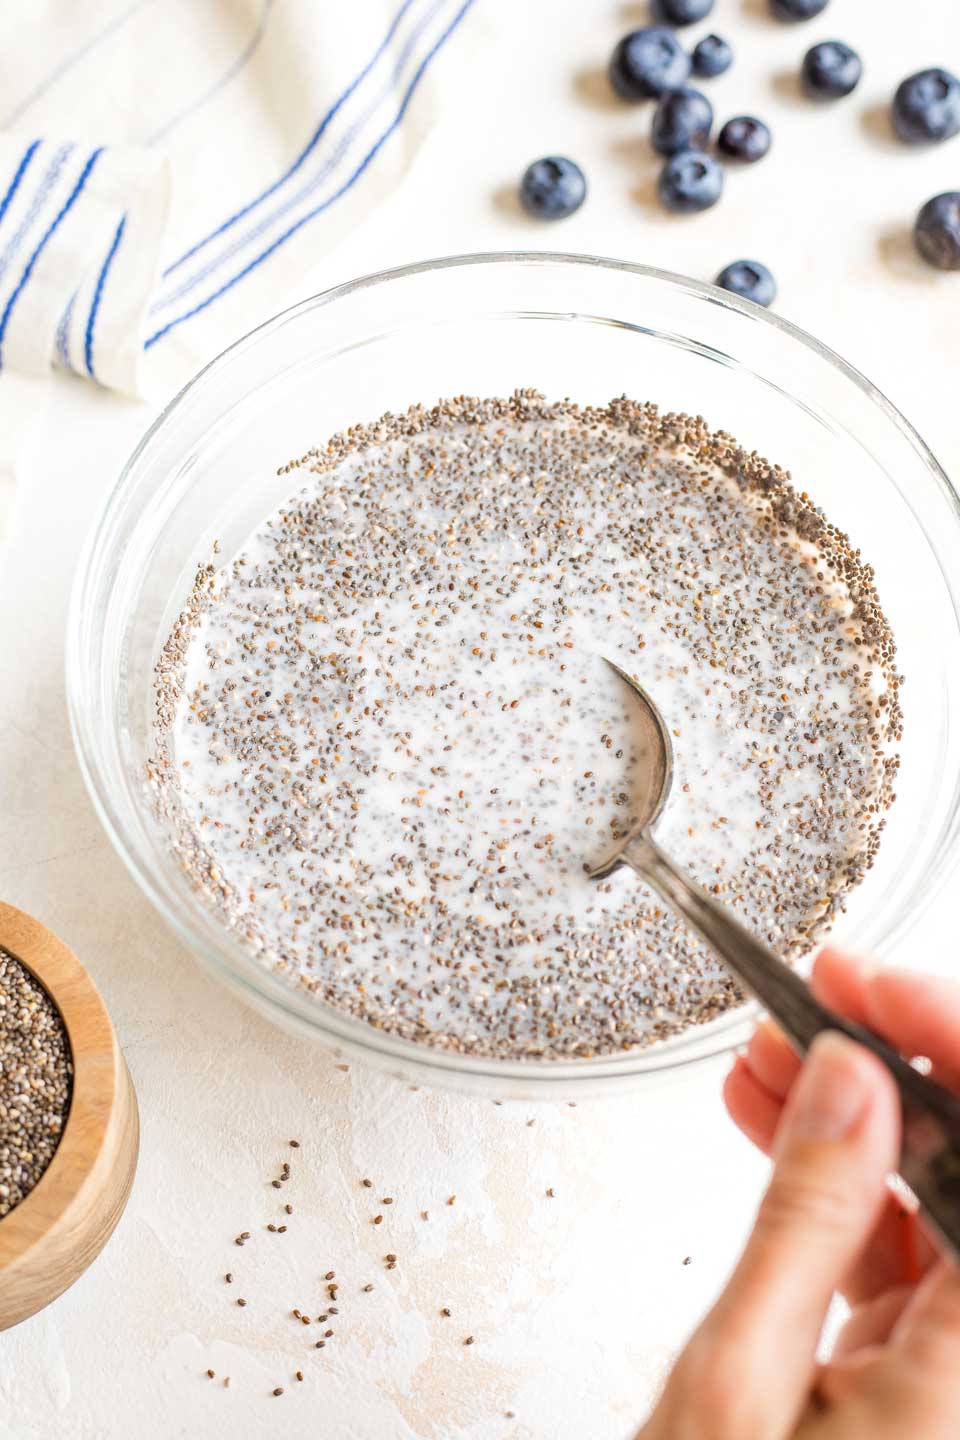 Hand holding spoon that's mixing up the chia pudding before chilling overnight.